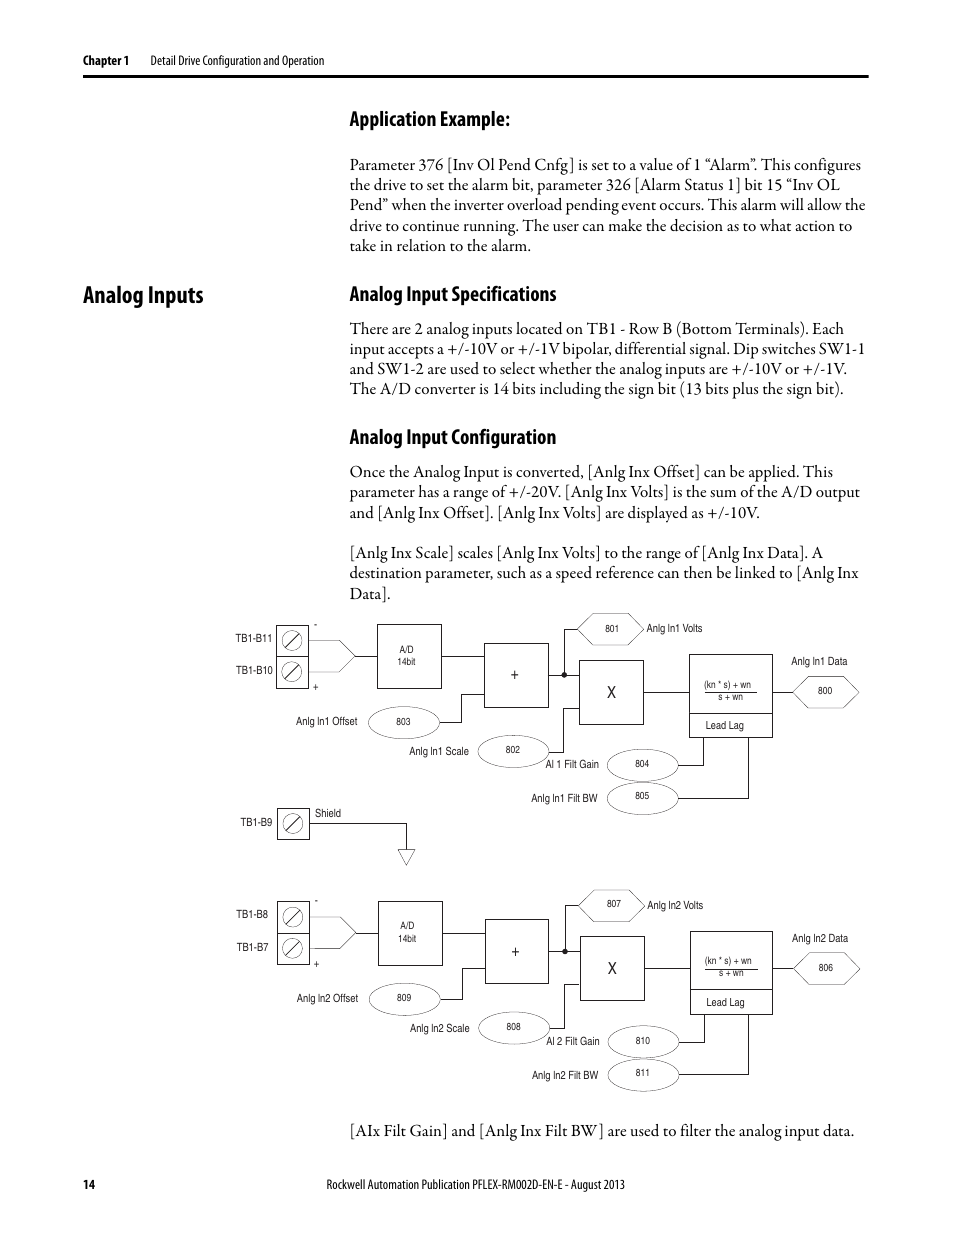 Application example, Analog inputs, Analog input specifications | Analog input configuration | Rockwell Automation 20D PowerFlex 700S with Phase I Control Reference Manual User Manual | Page 14 / 190